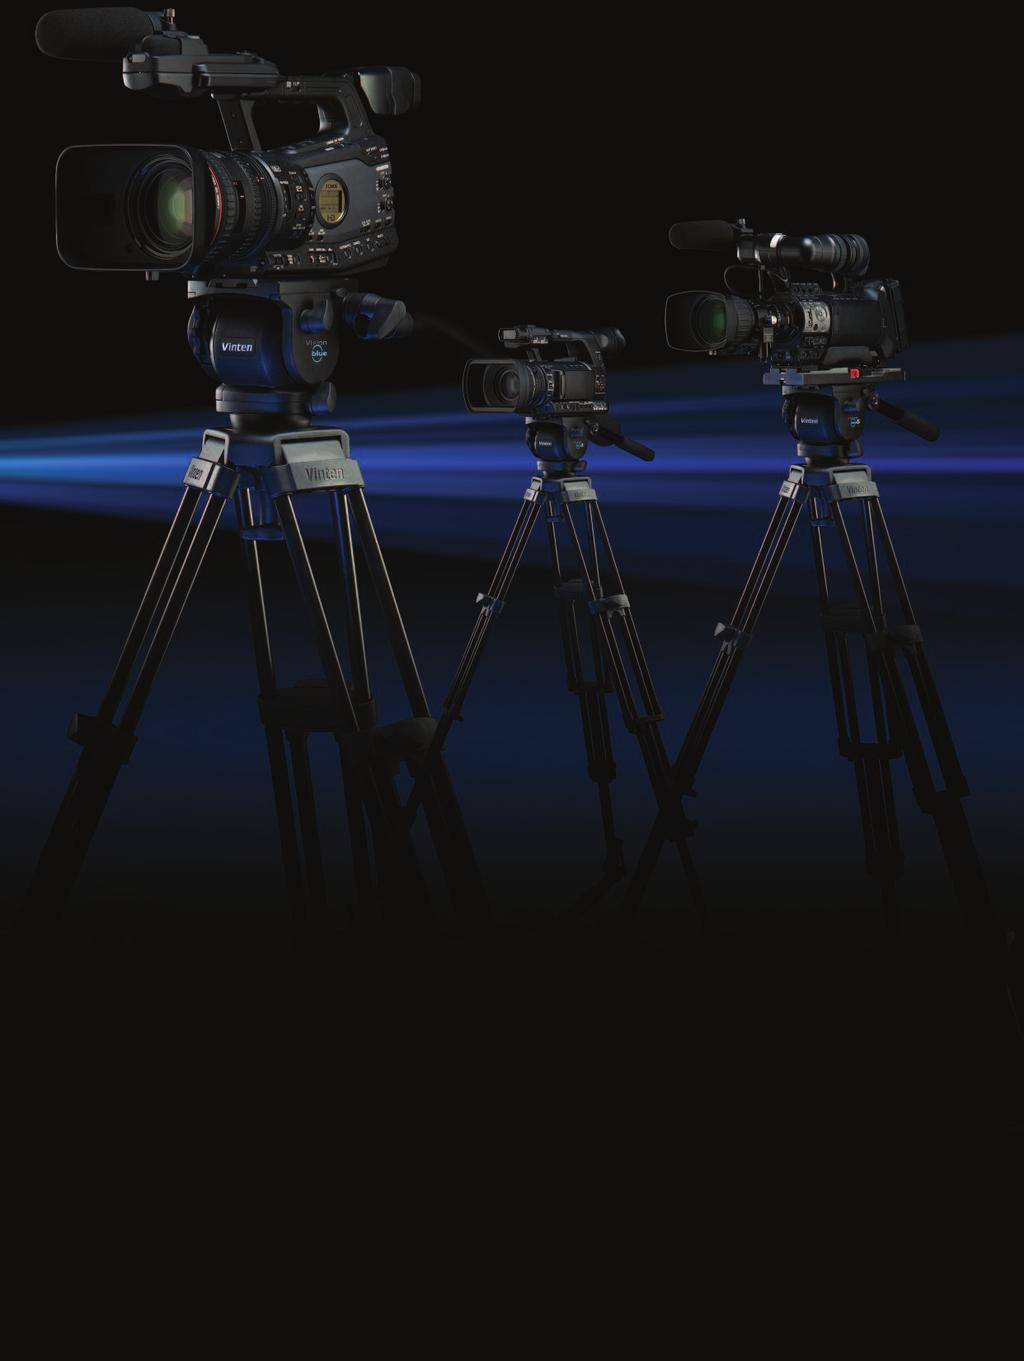 New bluebridge Introducing the new Vision blue Range... The award winning Vision blue head and tripod systems deliver effortless support, freeing you to focus on your creative edge.